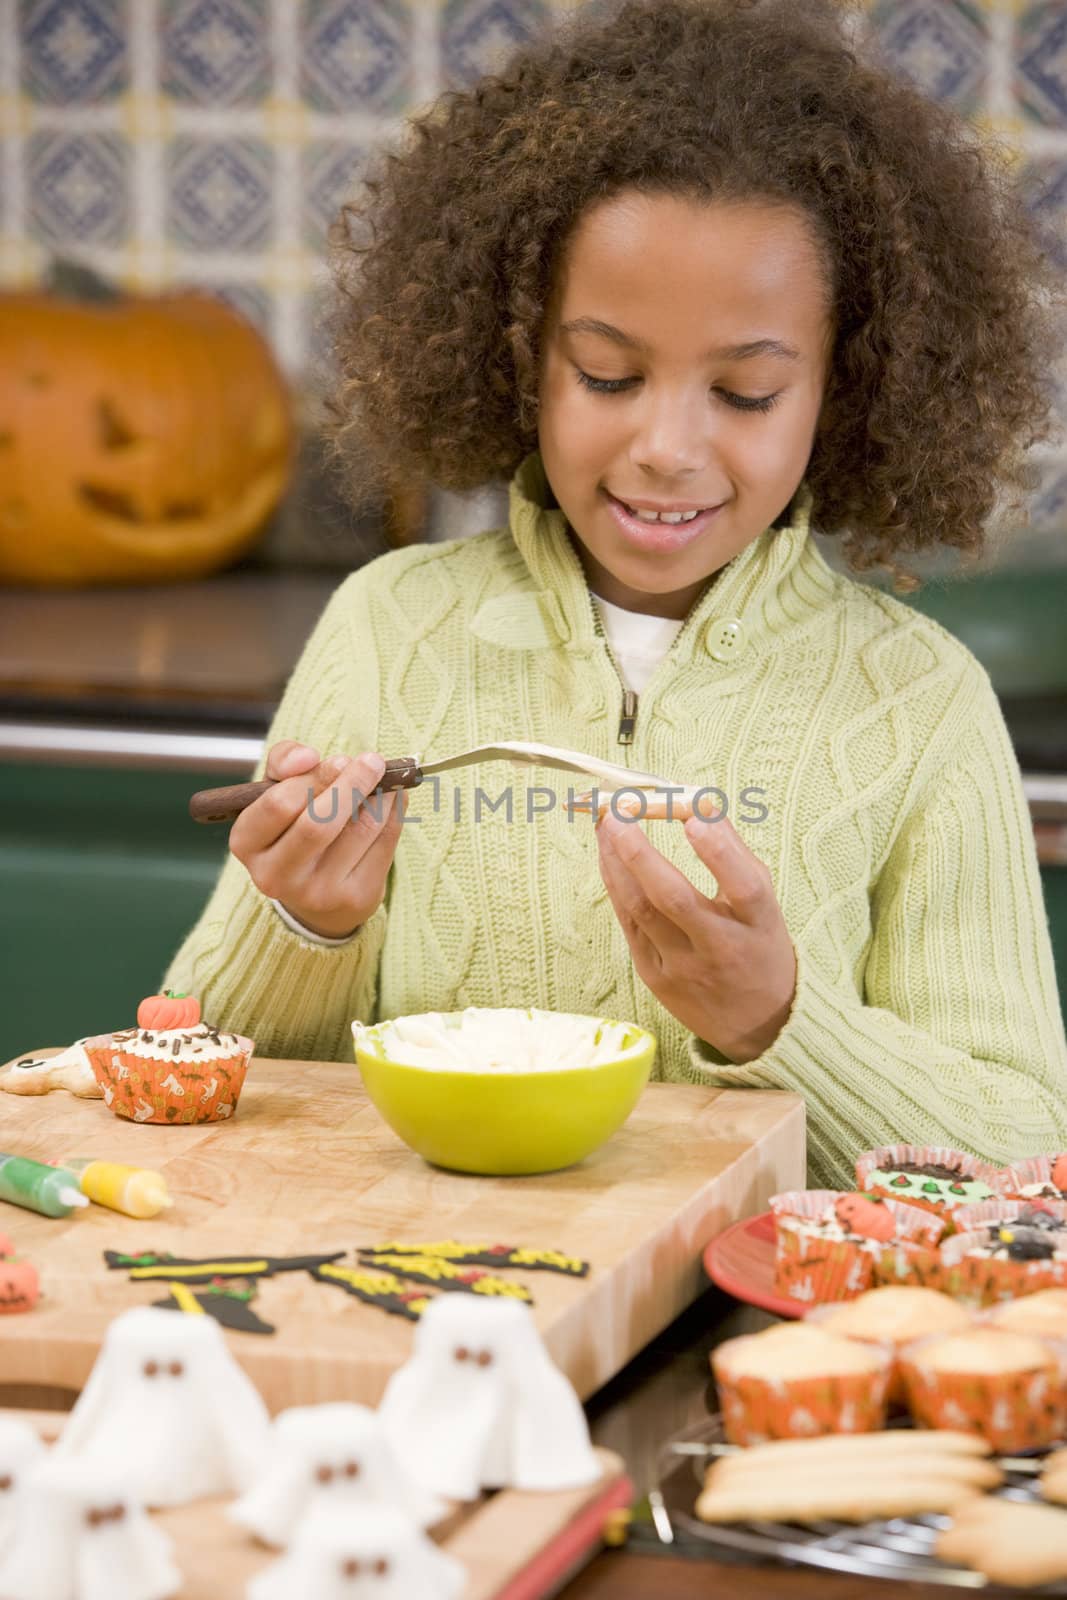 Young girl at Halloween making treats and smiling by MonkeyBusiness